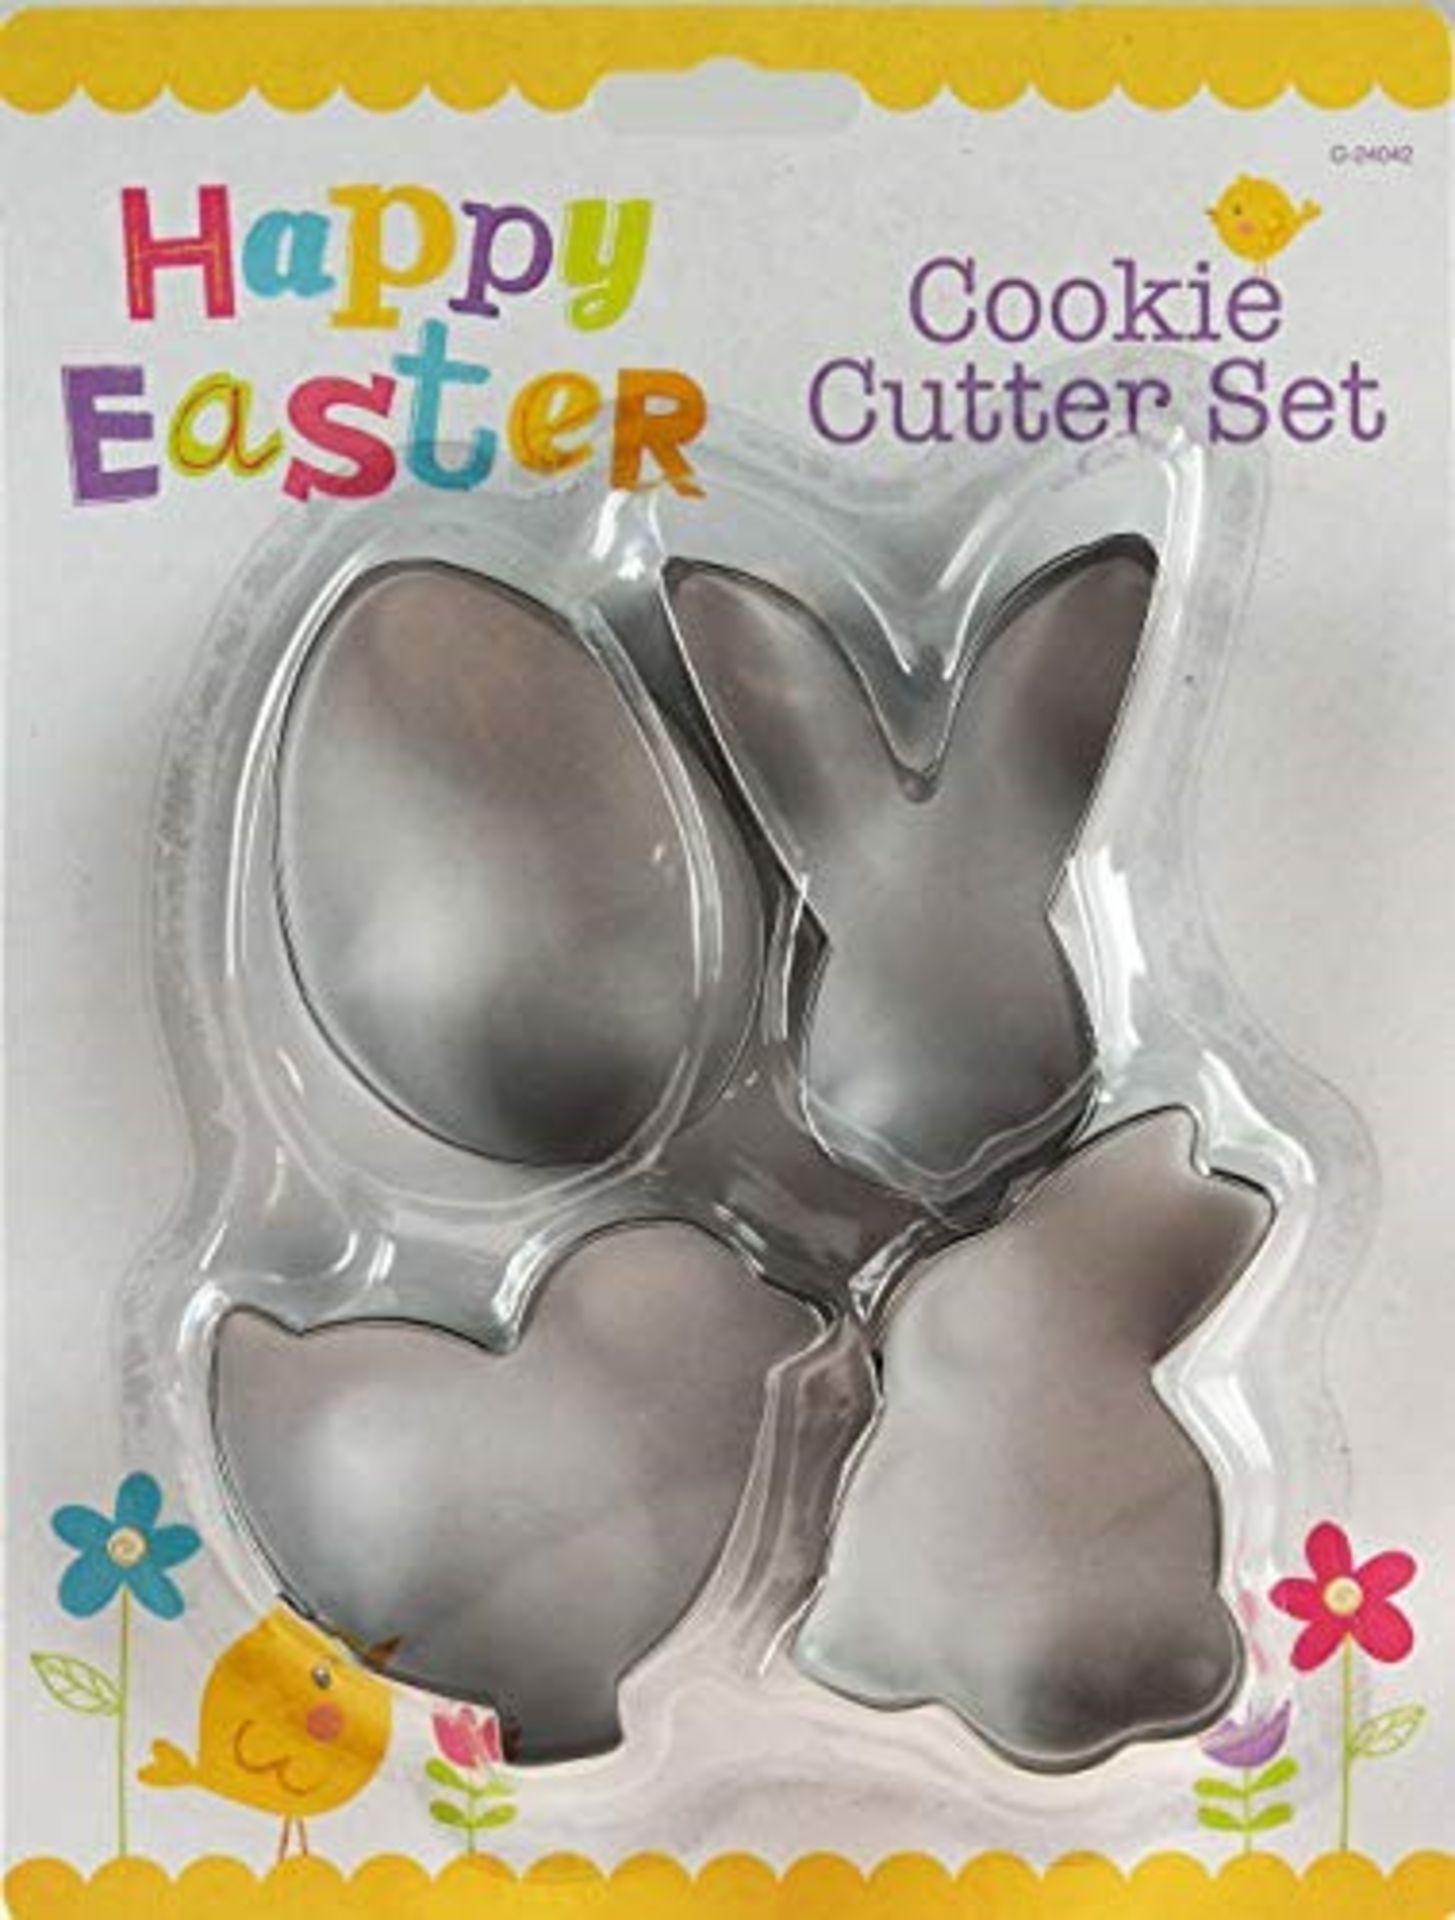 ITP G24042 Easter Steel Cookie Cutters Mould Cake Biscuit Baking Tool Decoration Set 4